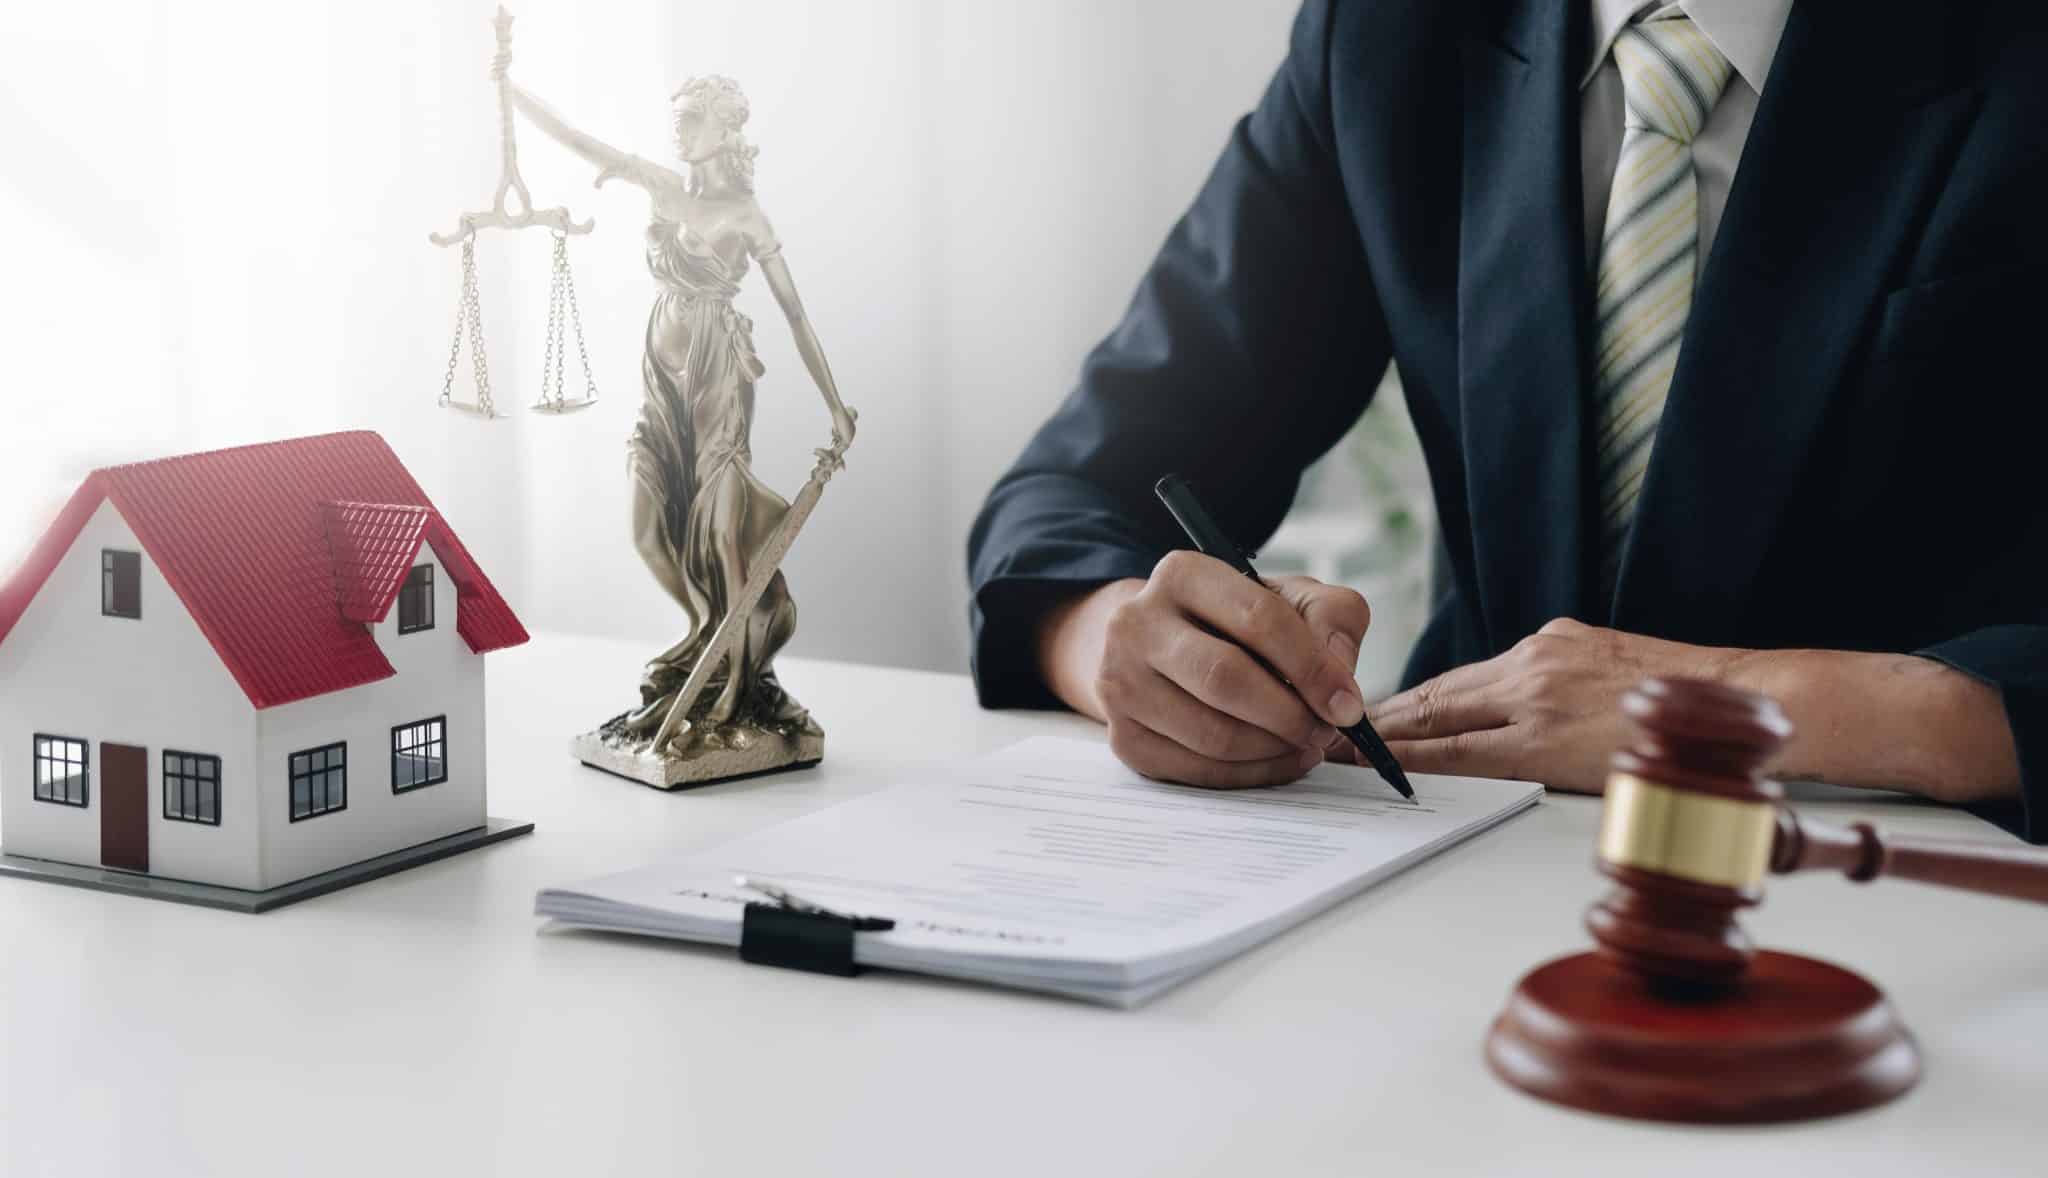 A lawyer filling out legal paperwork for a real estate transaction